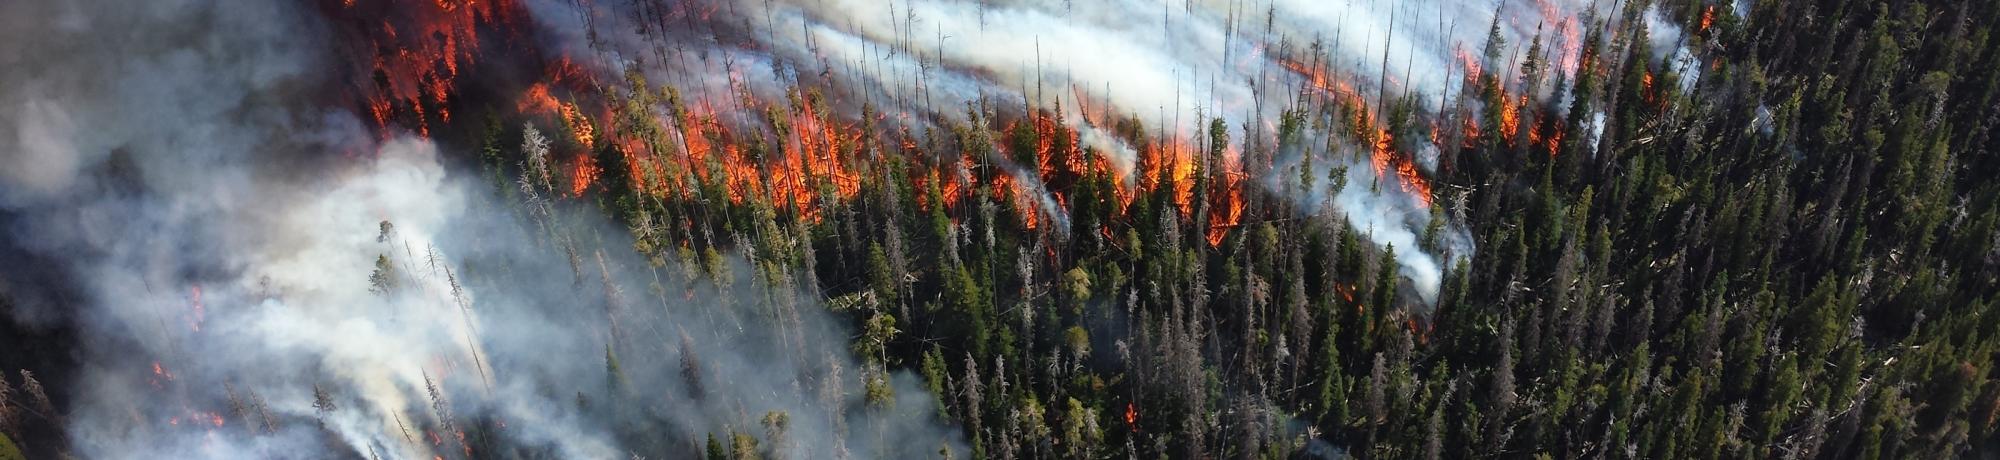 Wildfire burning through forest.